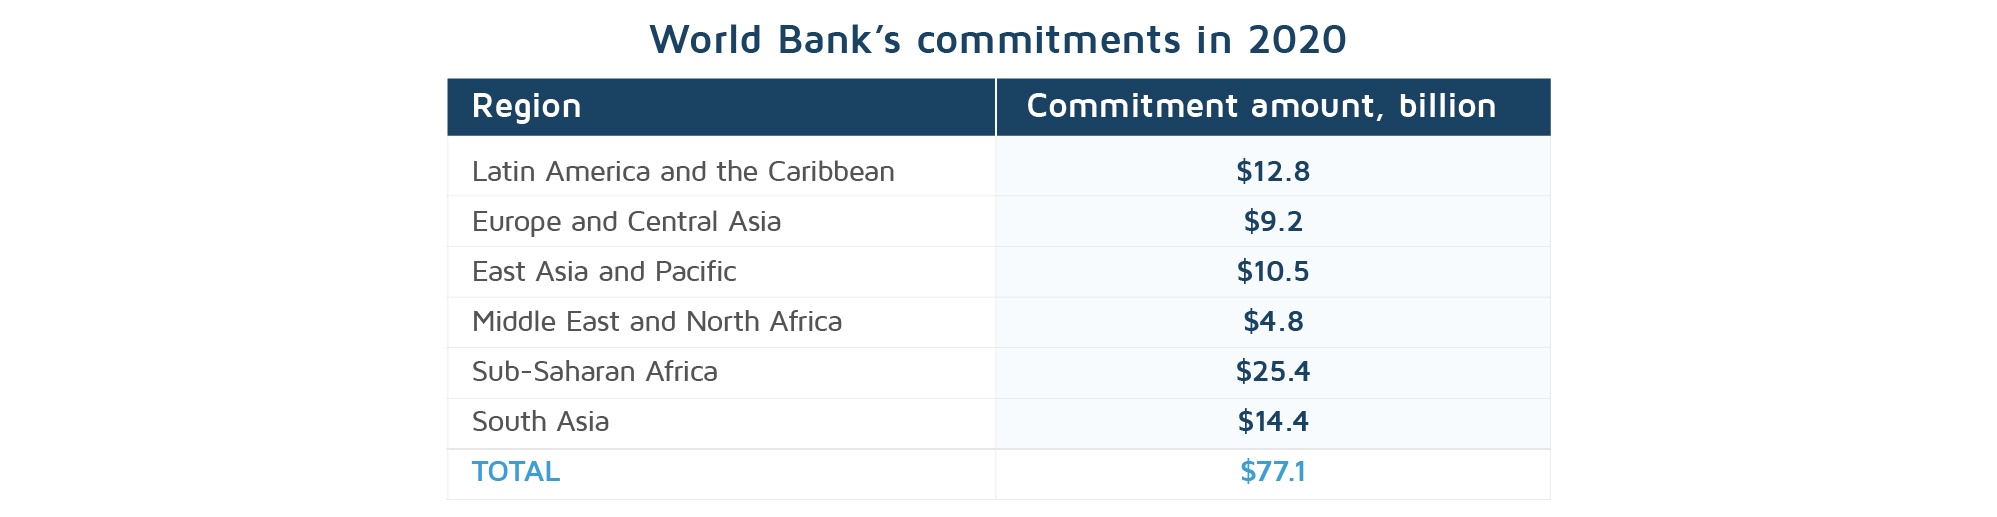 The commitments of the World Bank in 2020